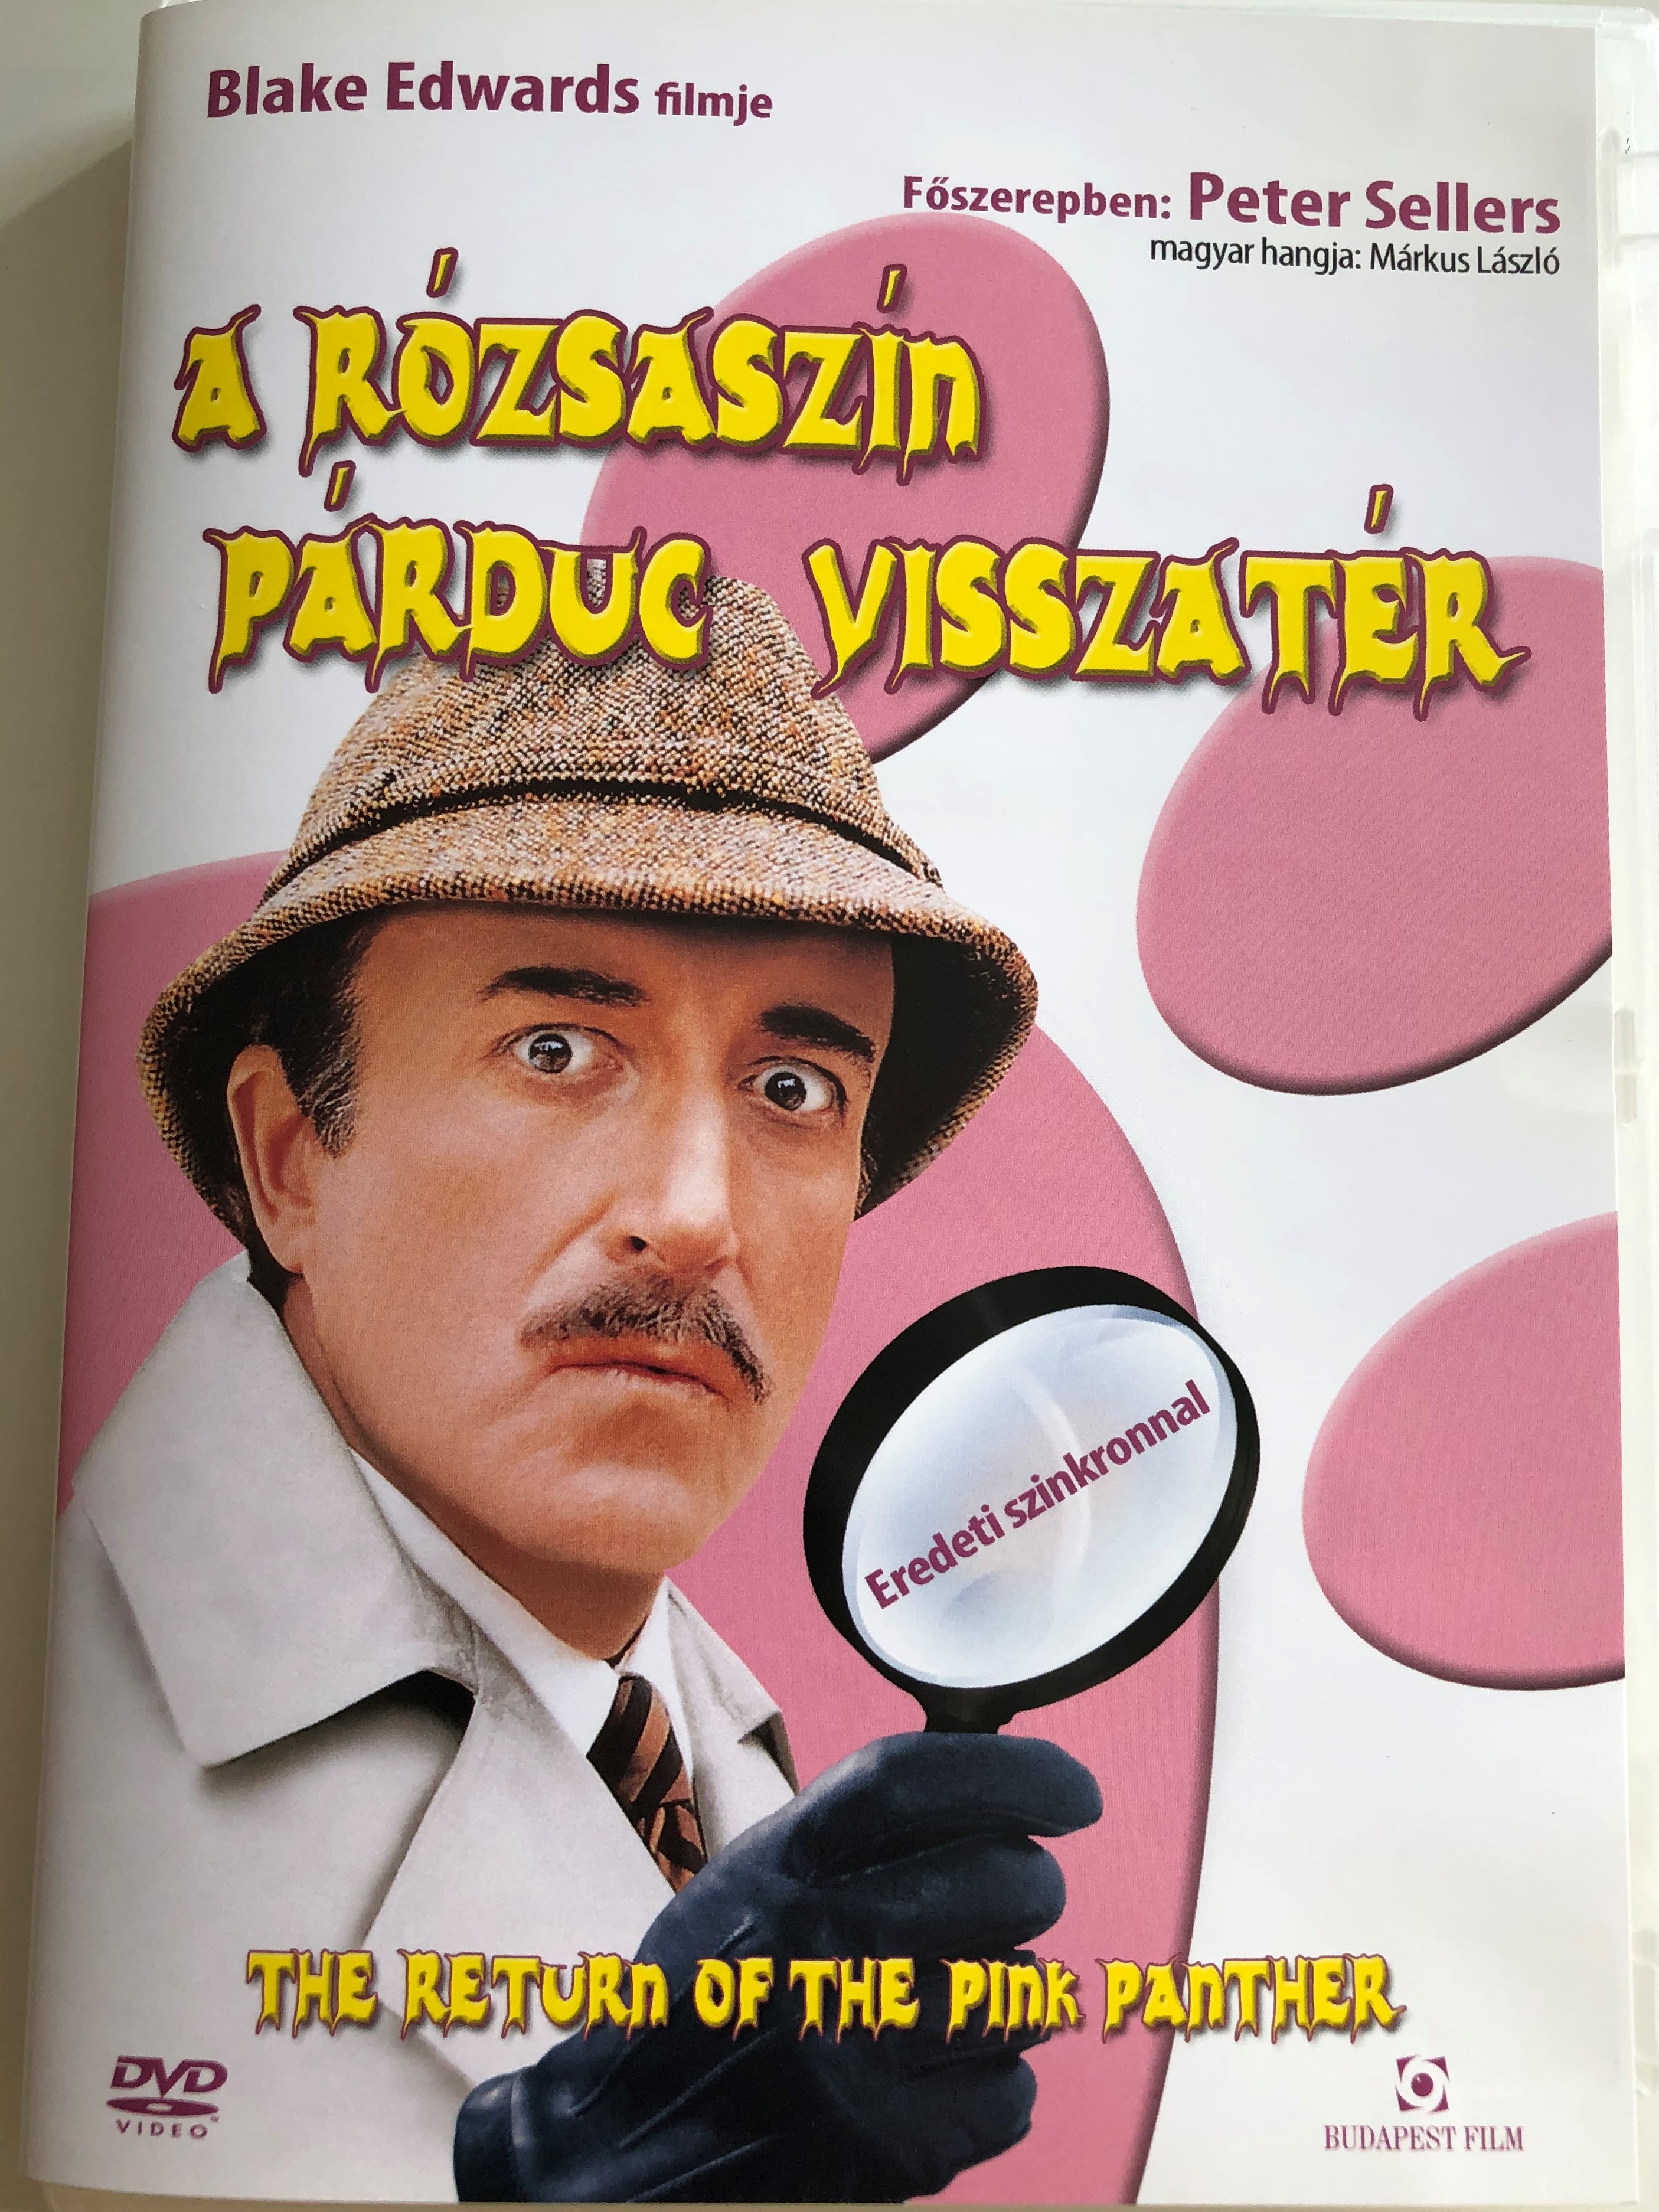 the-return-of-the-pink-panther-dvd-1975-a-r-zsasz-n-p-rduc-visszat-r-directed-by-blake-edwards-starring-peter-sellers-christopher-plummer-catherine-schell-herbert-lom-1-.jpg